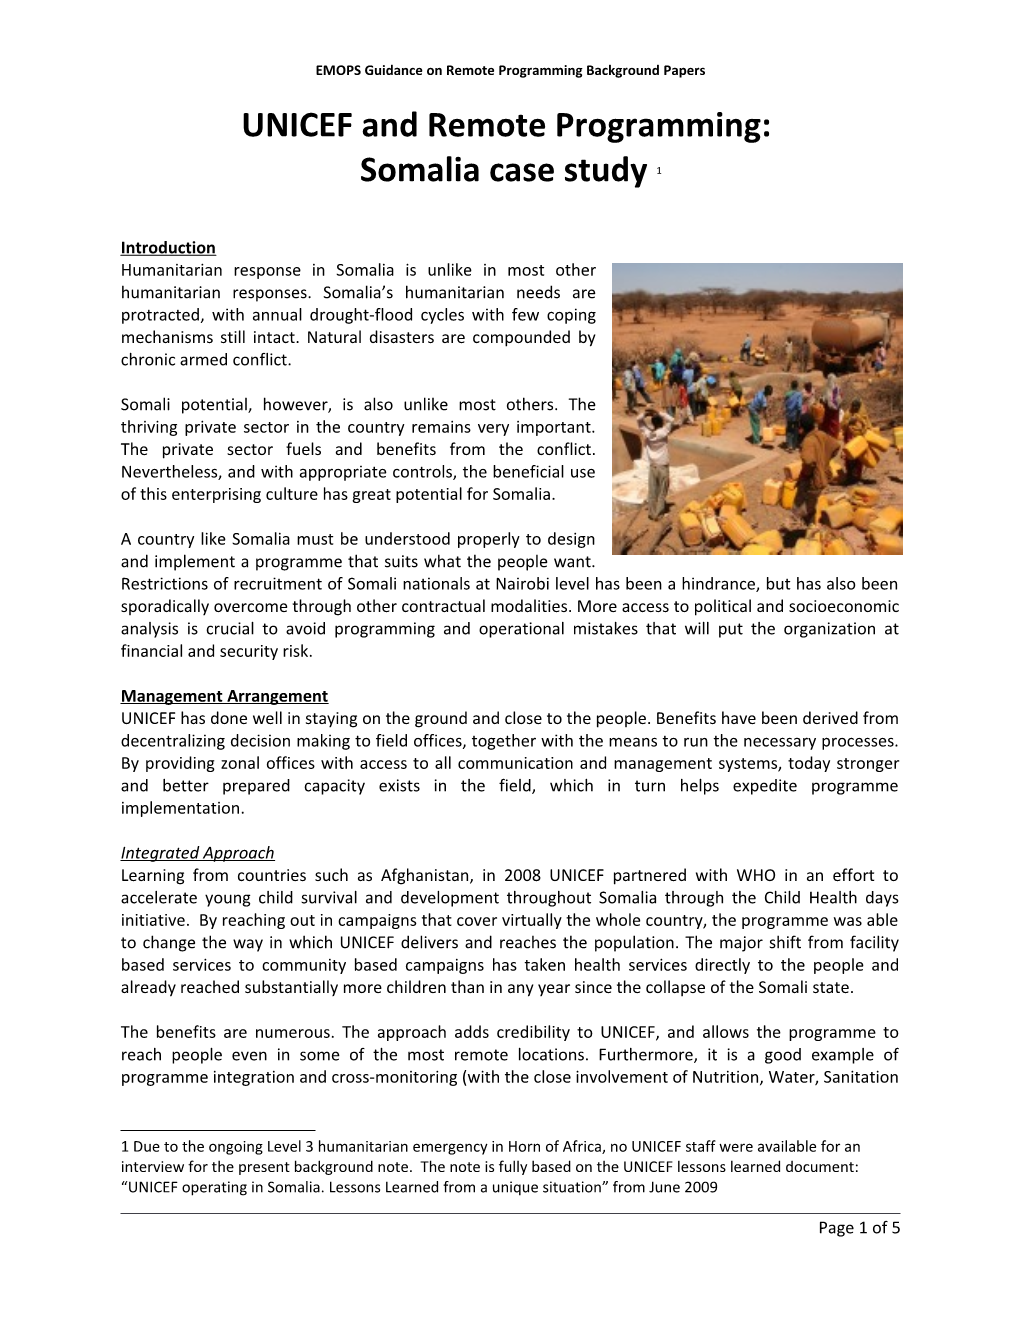 Summary of Experiences with Remote Programming in Somalia